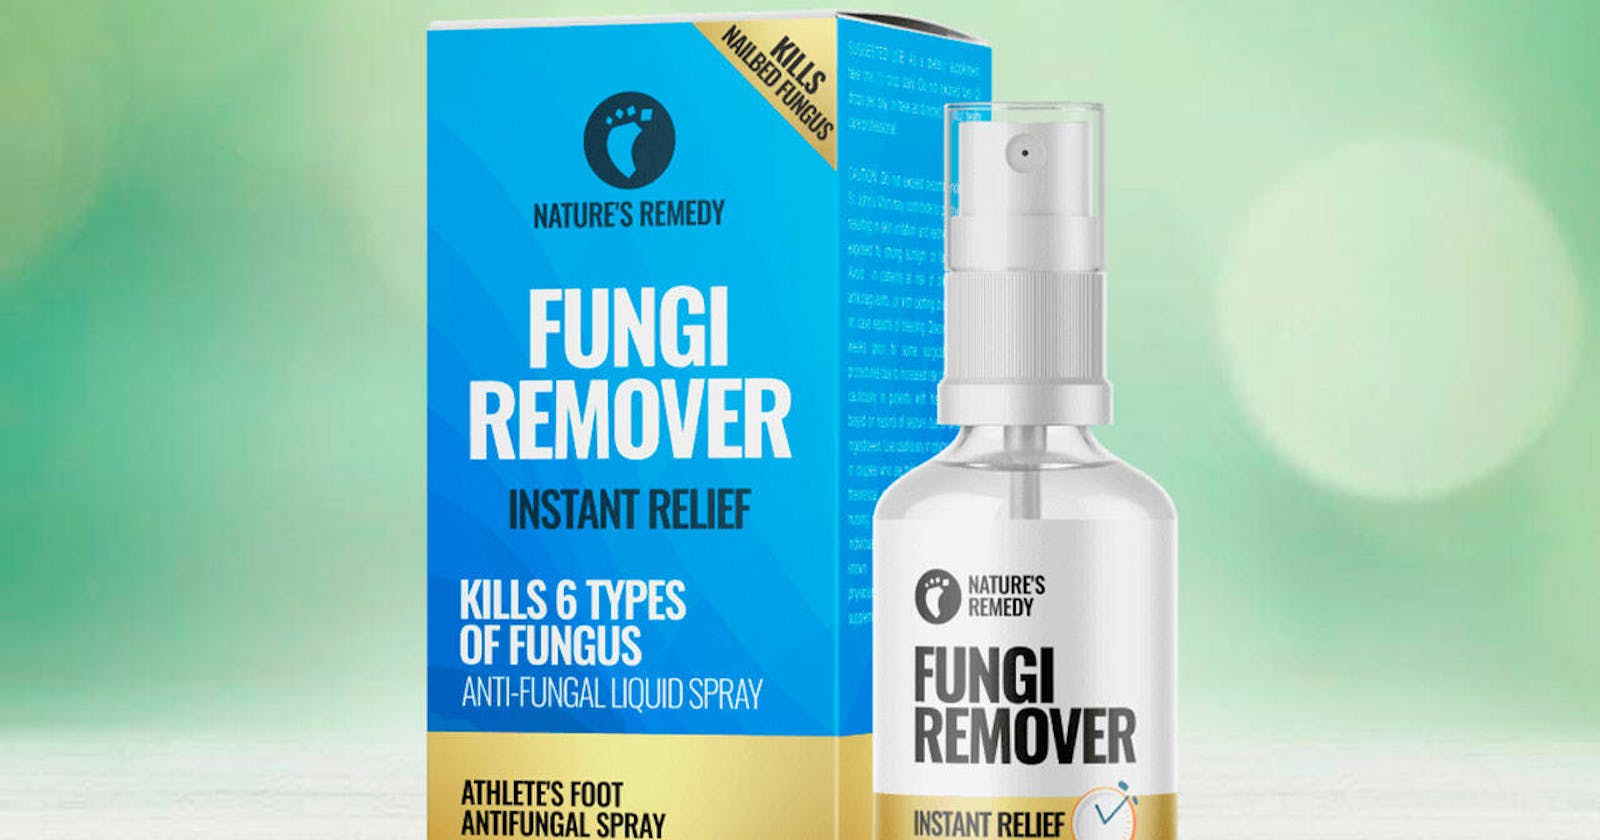 Nature's Remedy Fungi Remover New Zealand : Real Results or Fake Hype:How does it work?